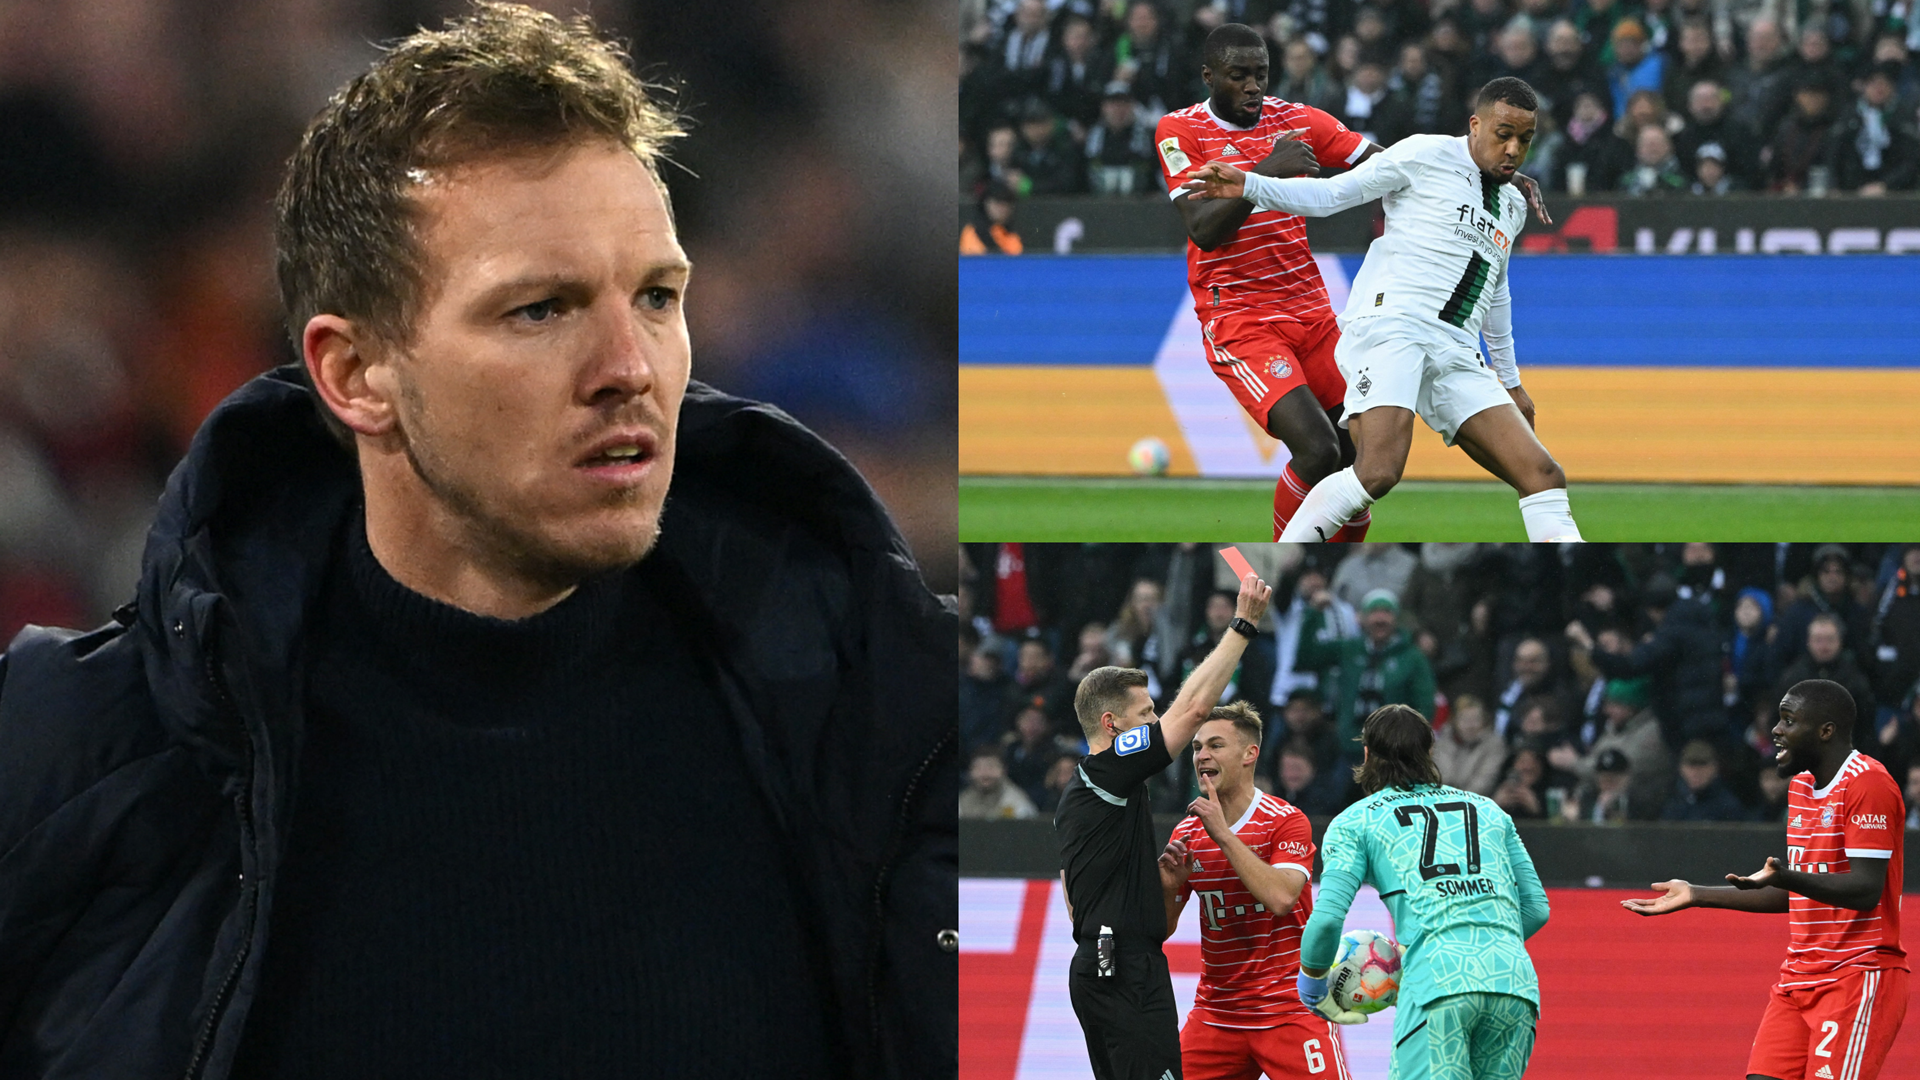 Bayern Munich manager Julian Nagelsmann charged referee dressing room after  Dayot Upamecano red card led to defeat | Goal.com